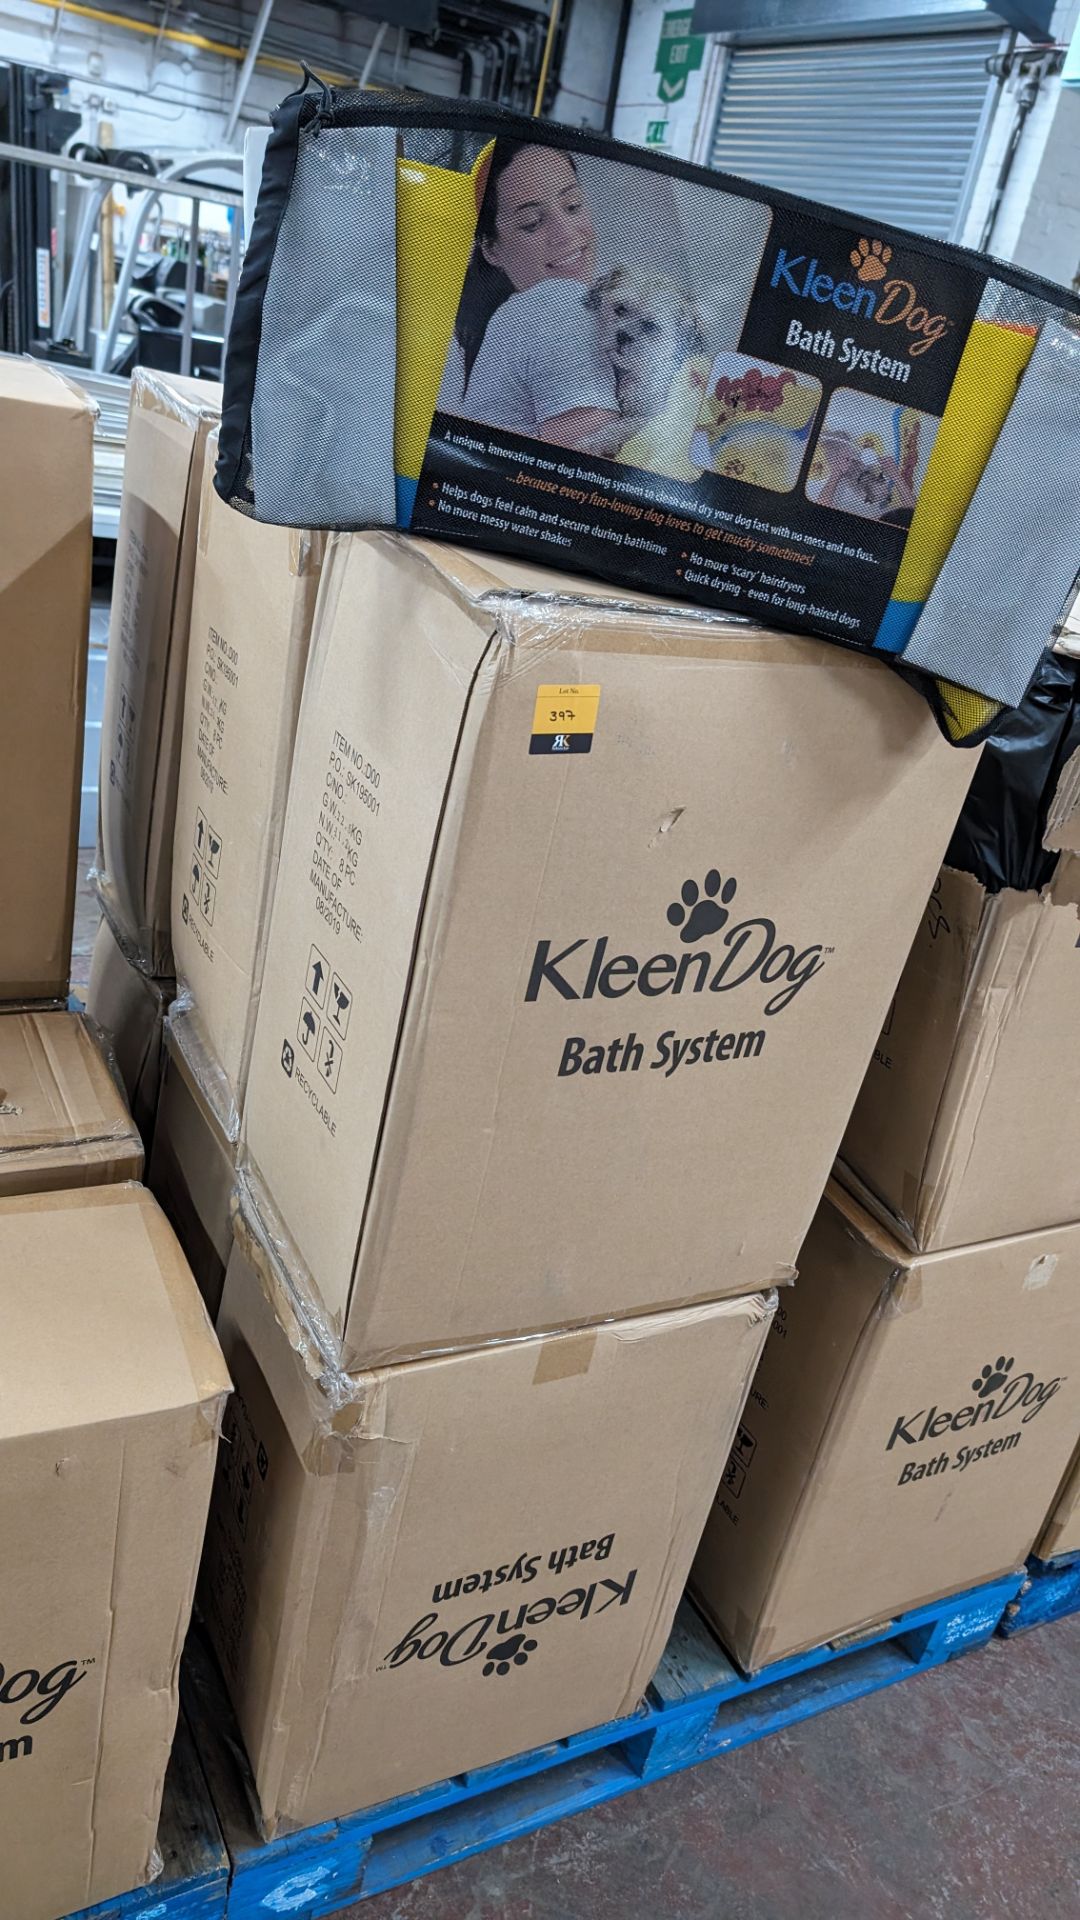 48 off Kleen Dog bath systems - 6 cartons - Image 6 of 6